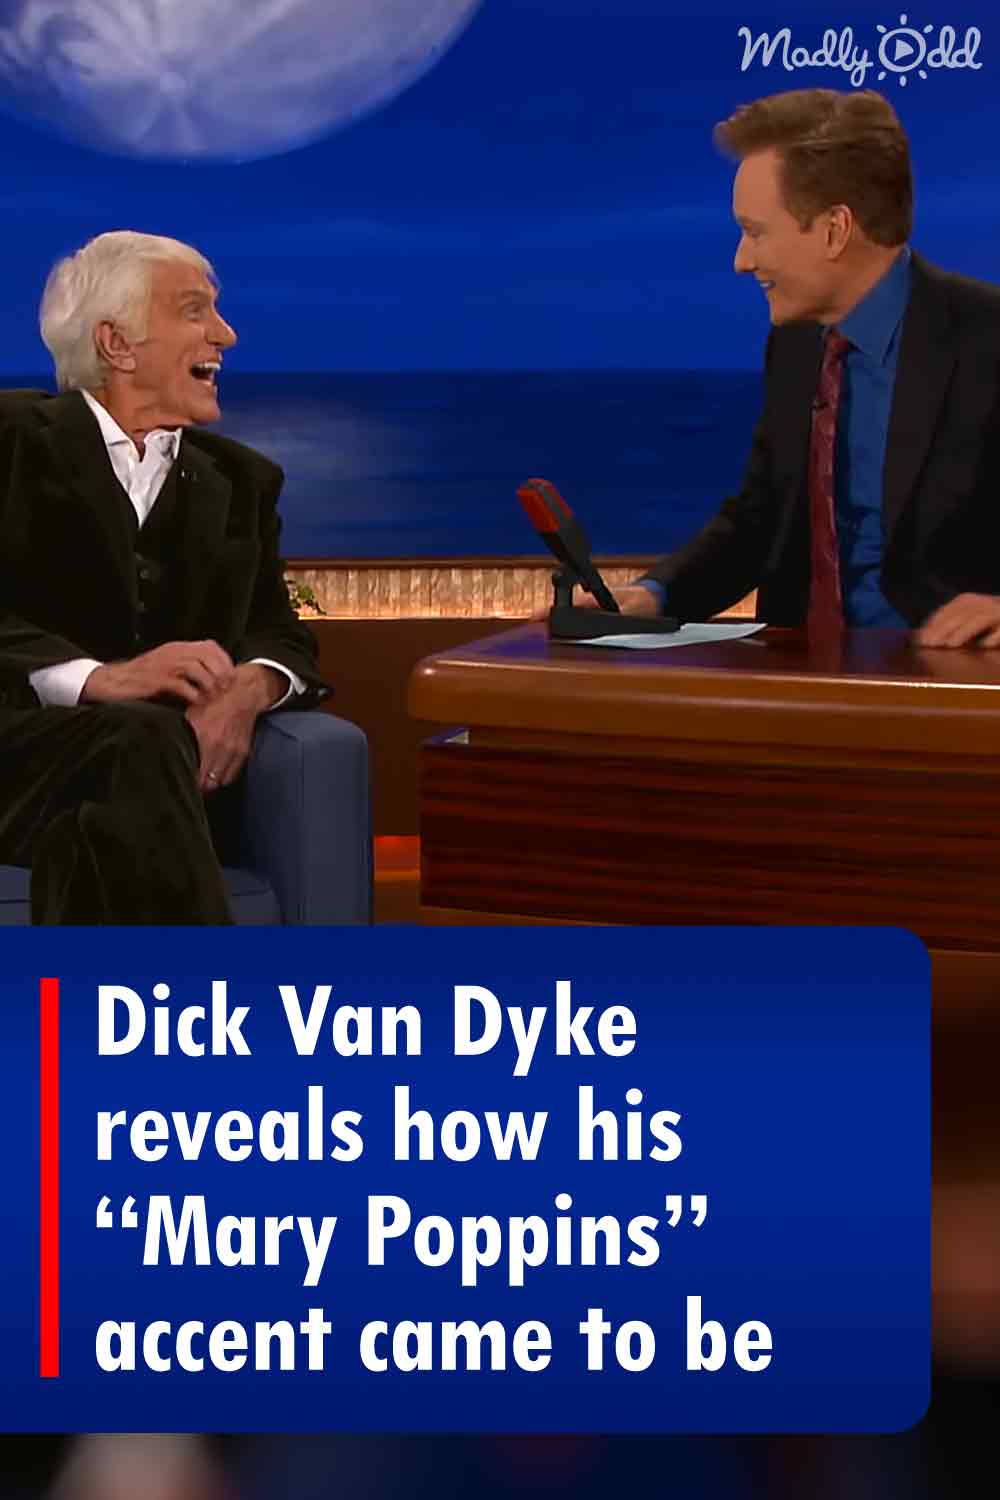 Dick Van Dyke reveals how his “Mary Poppins” accent came to be